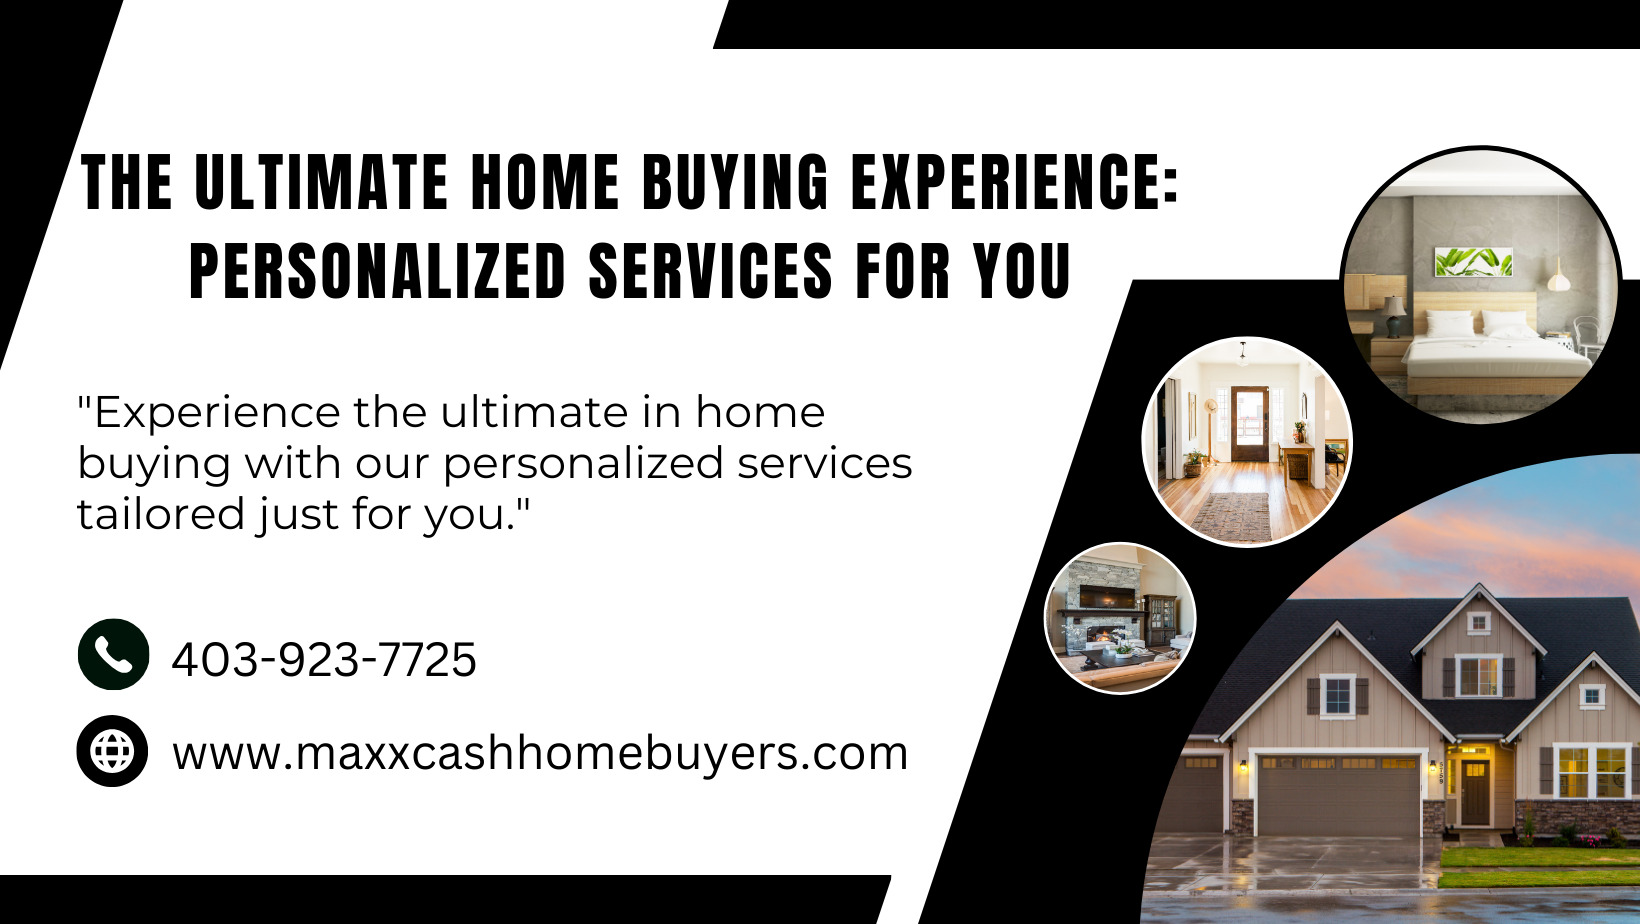 The Ultimate Home Buying Experience: Personalized Services for You